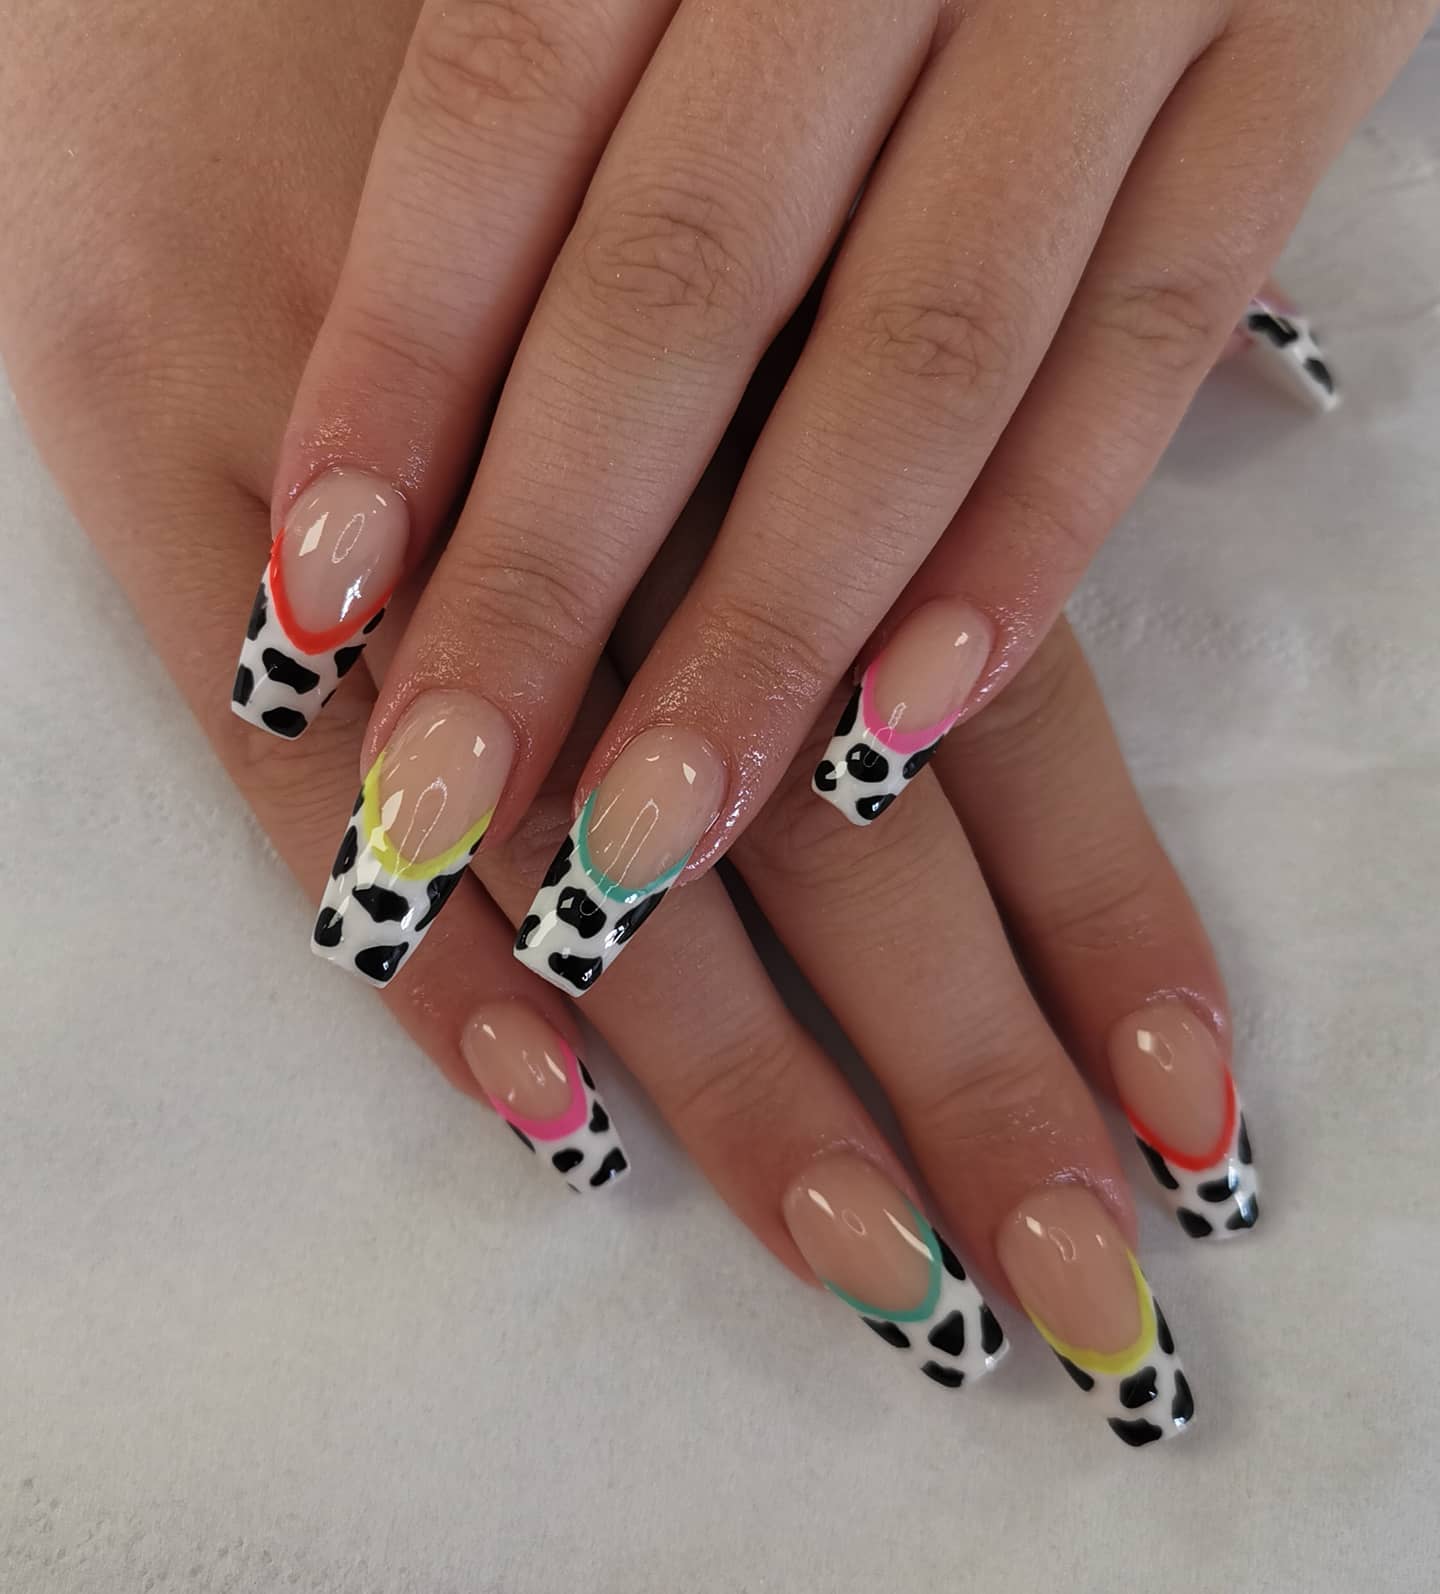 It's great to see how one simple nail can be turned into something so elegant. French tips are always important when it comes to nail art, so let's make a combo. Plus, colorful lines for each nail look amazing, too.